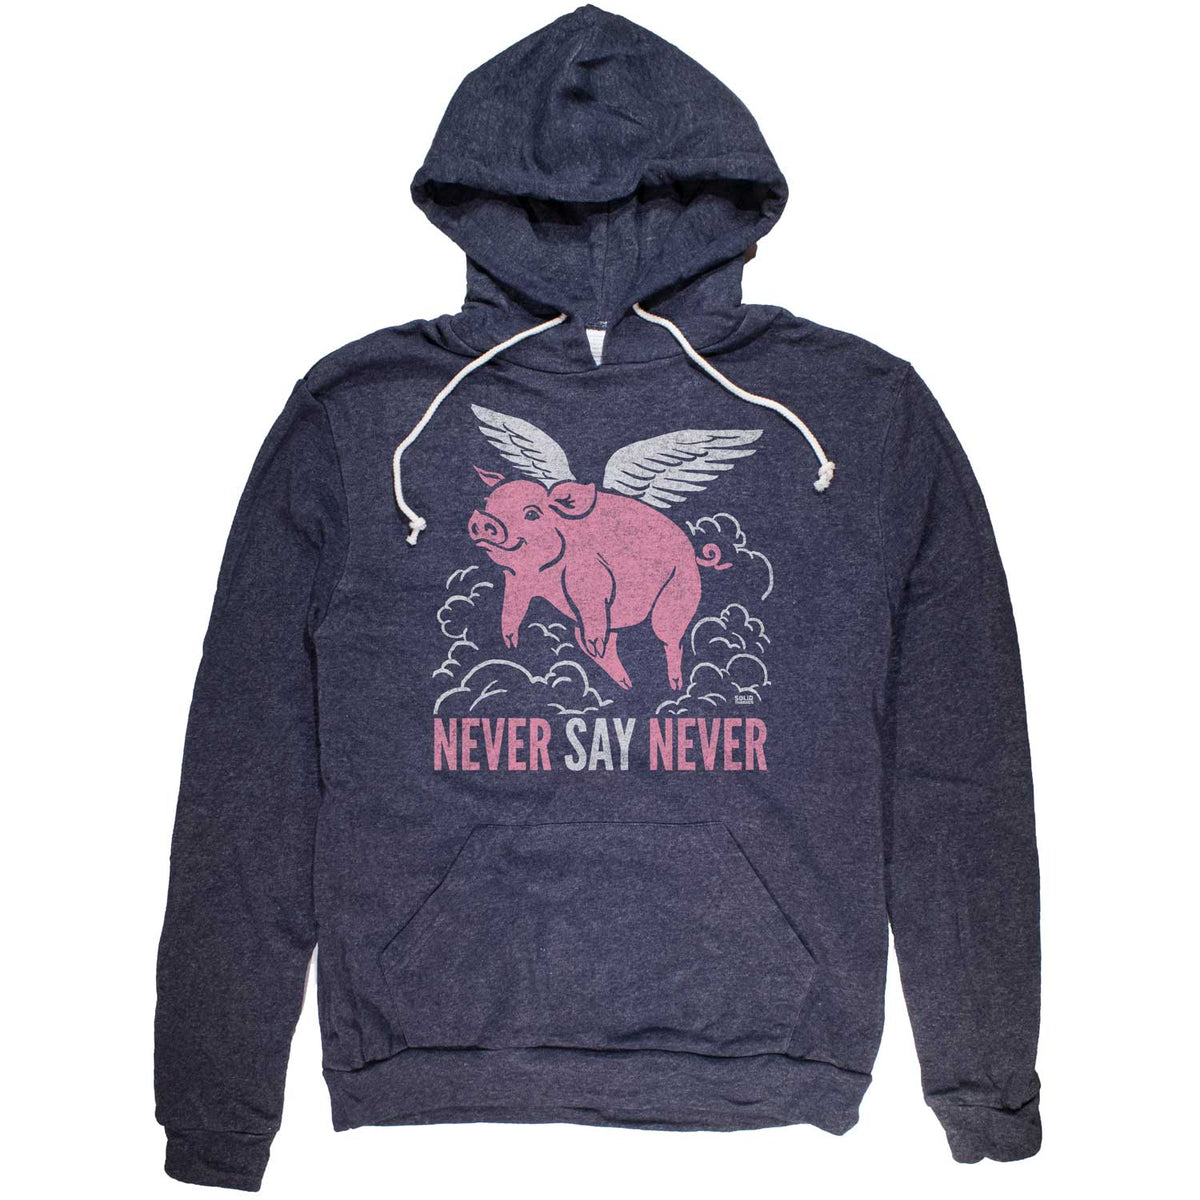 Unisex Never Say Never Cool Vintage Graphic Hoodie | Funny Pig Sweatshirt | Solid Threads